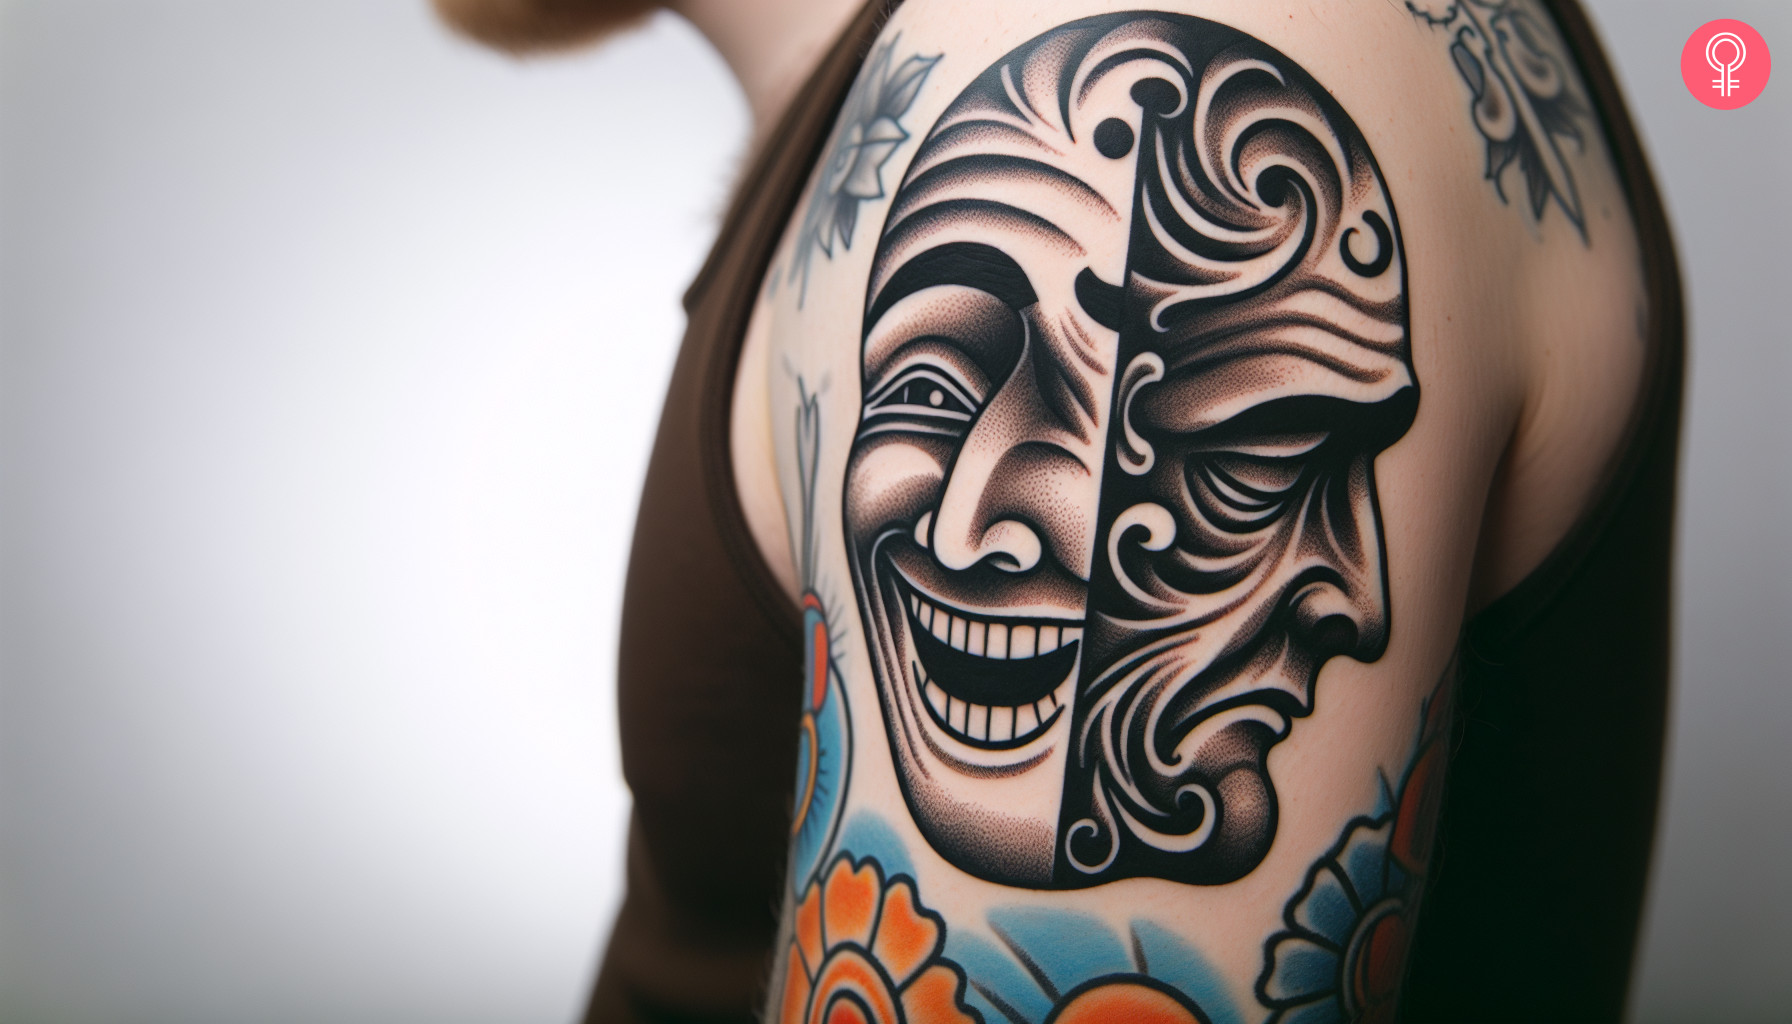 A man flaunting the Melpomene and Thalia tattoo on his upper arm